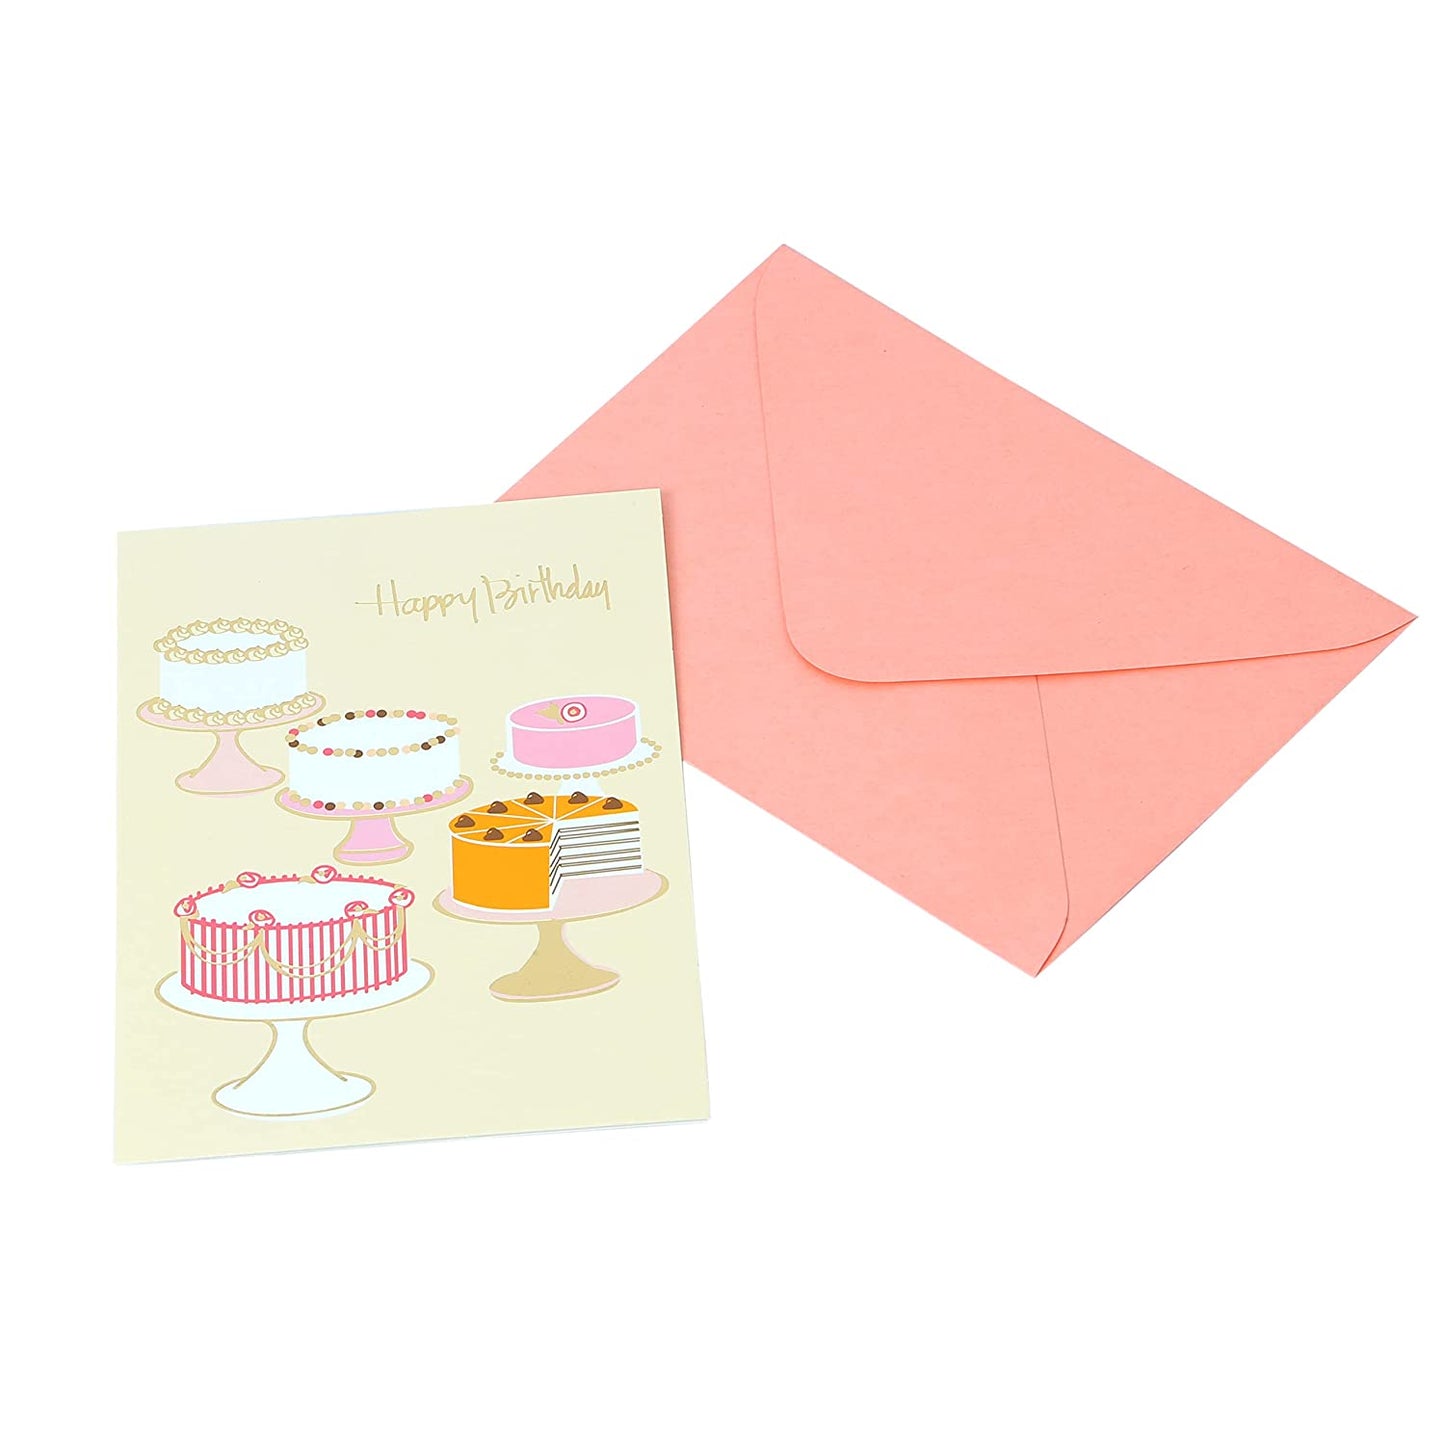 PaperPep Happy Birthday Mini Blank Cards With Envelopes 10 Different Blank Greeting Cards Colored Envelopes. Box of 10 Unique Designs 60 Assorted Cards